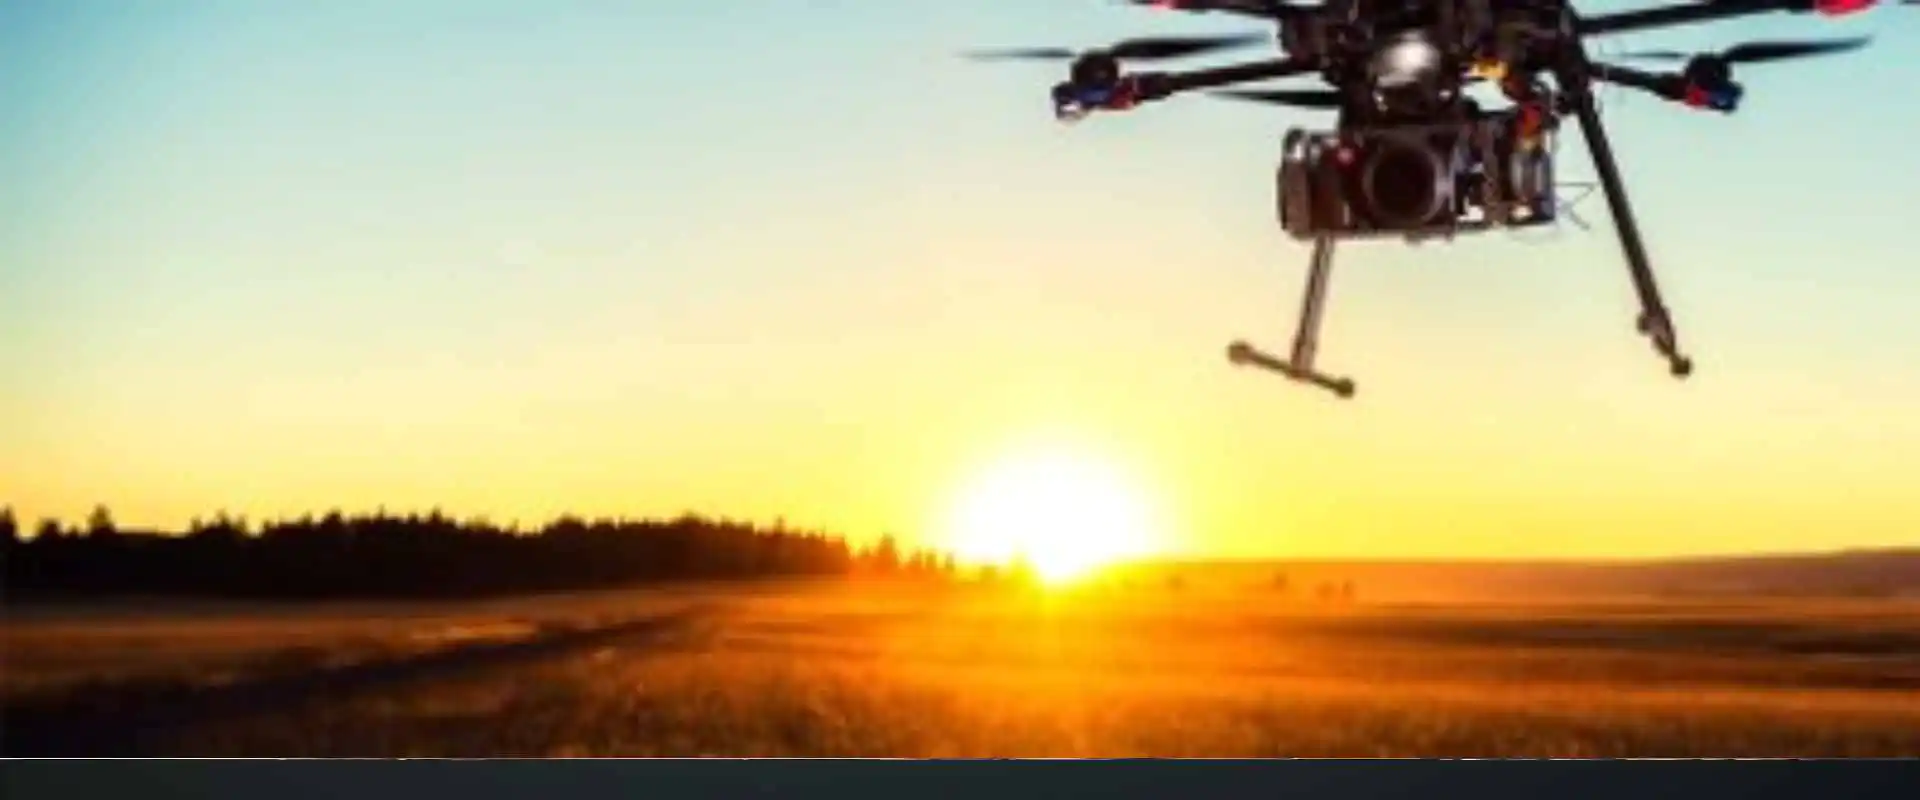 Drone Technology: An Eye in the Sky for Oil and Gas Industry